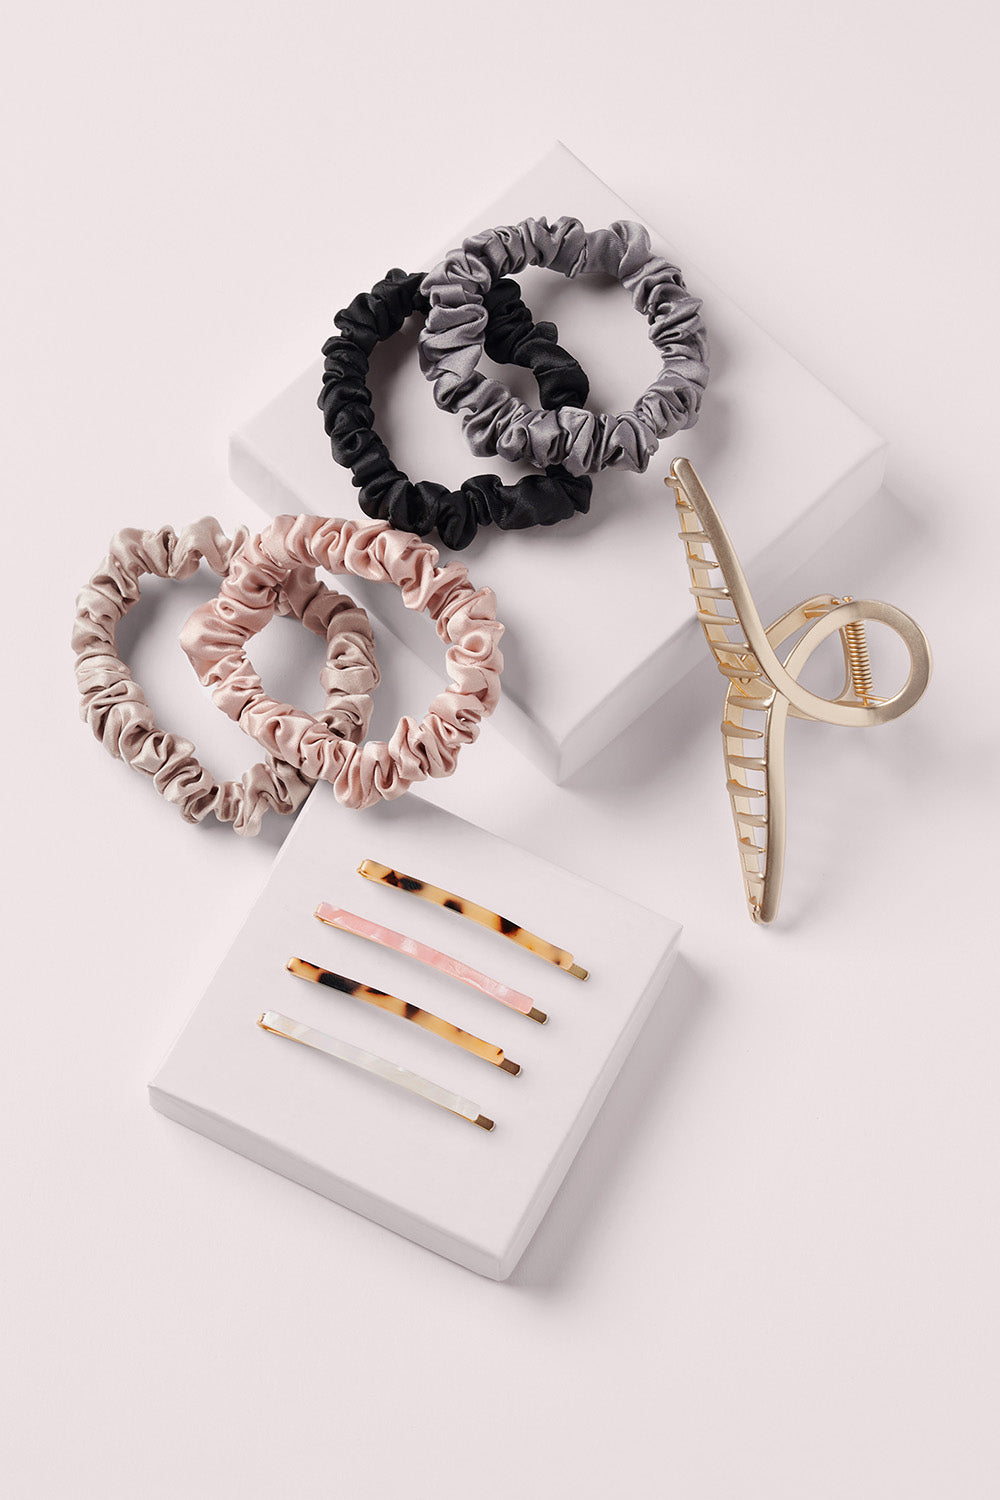 Elevate Your Style with Chic and Budget-friendly Hair Accessories